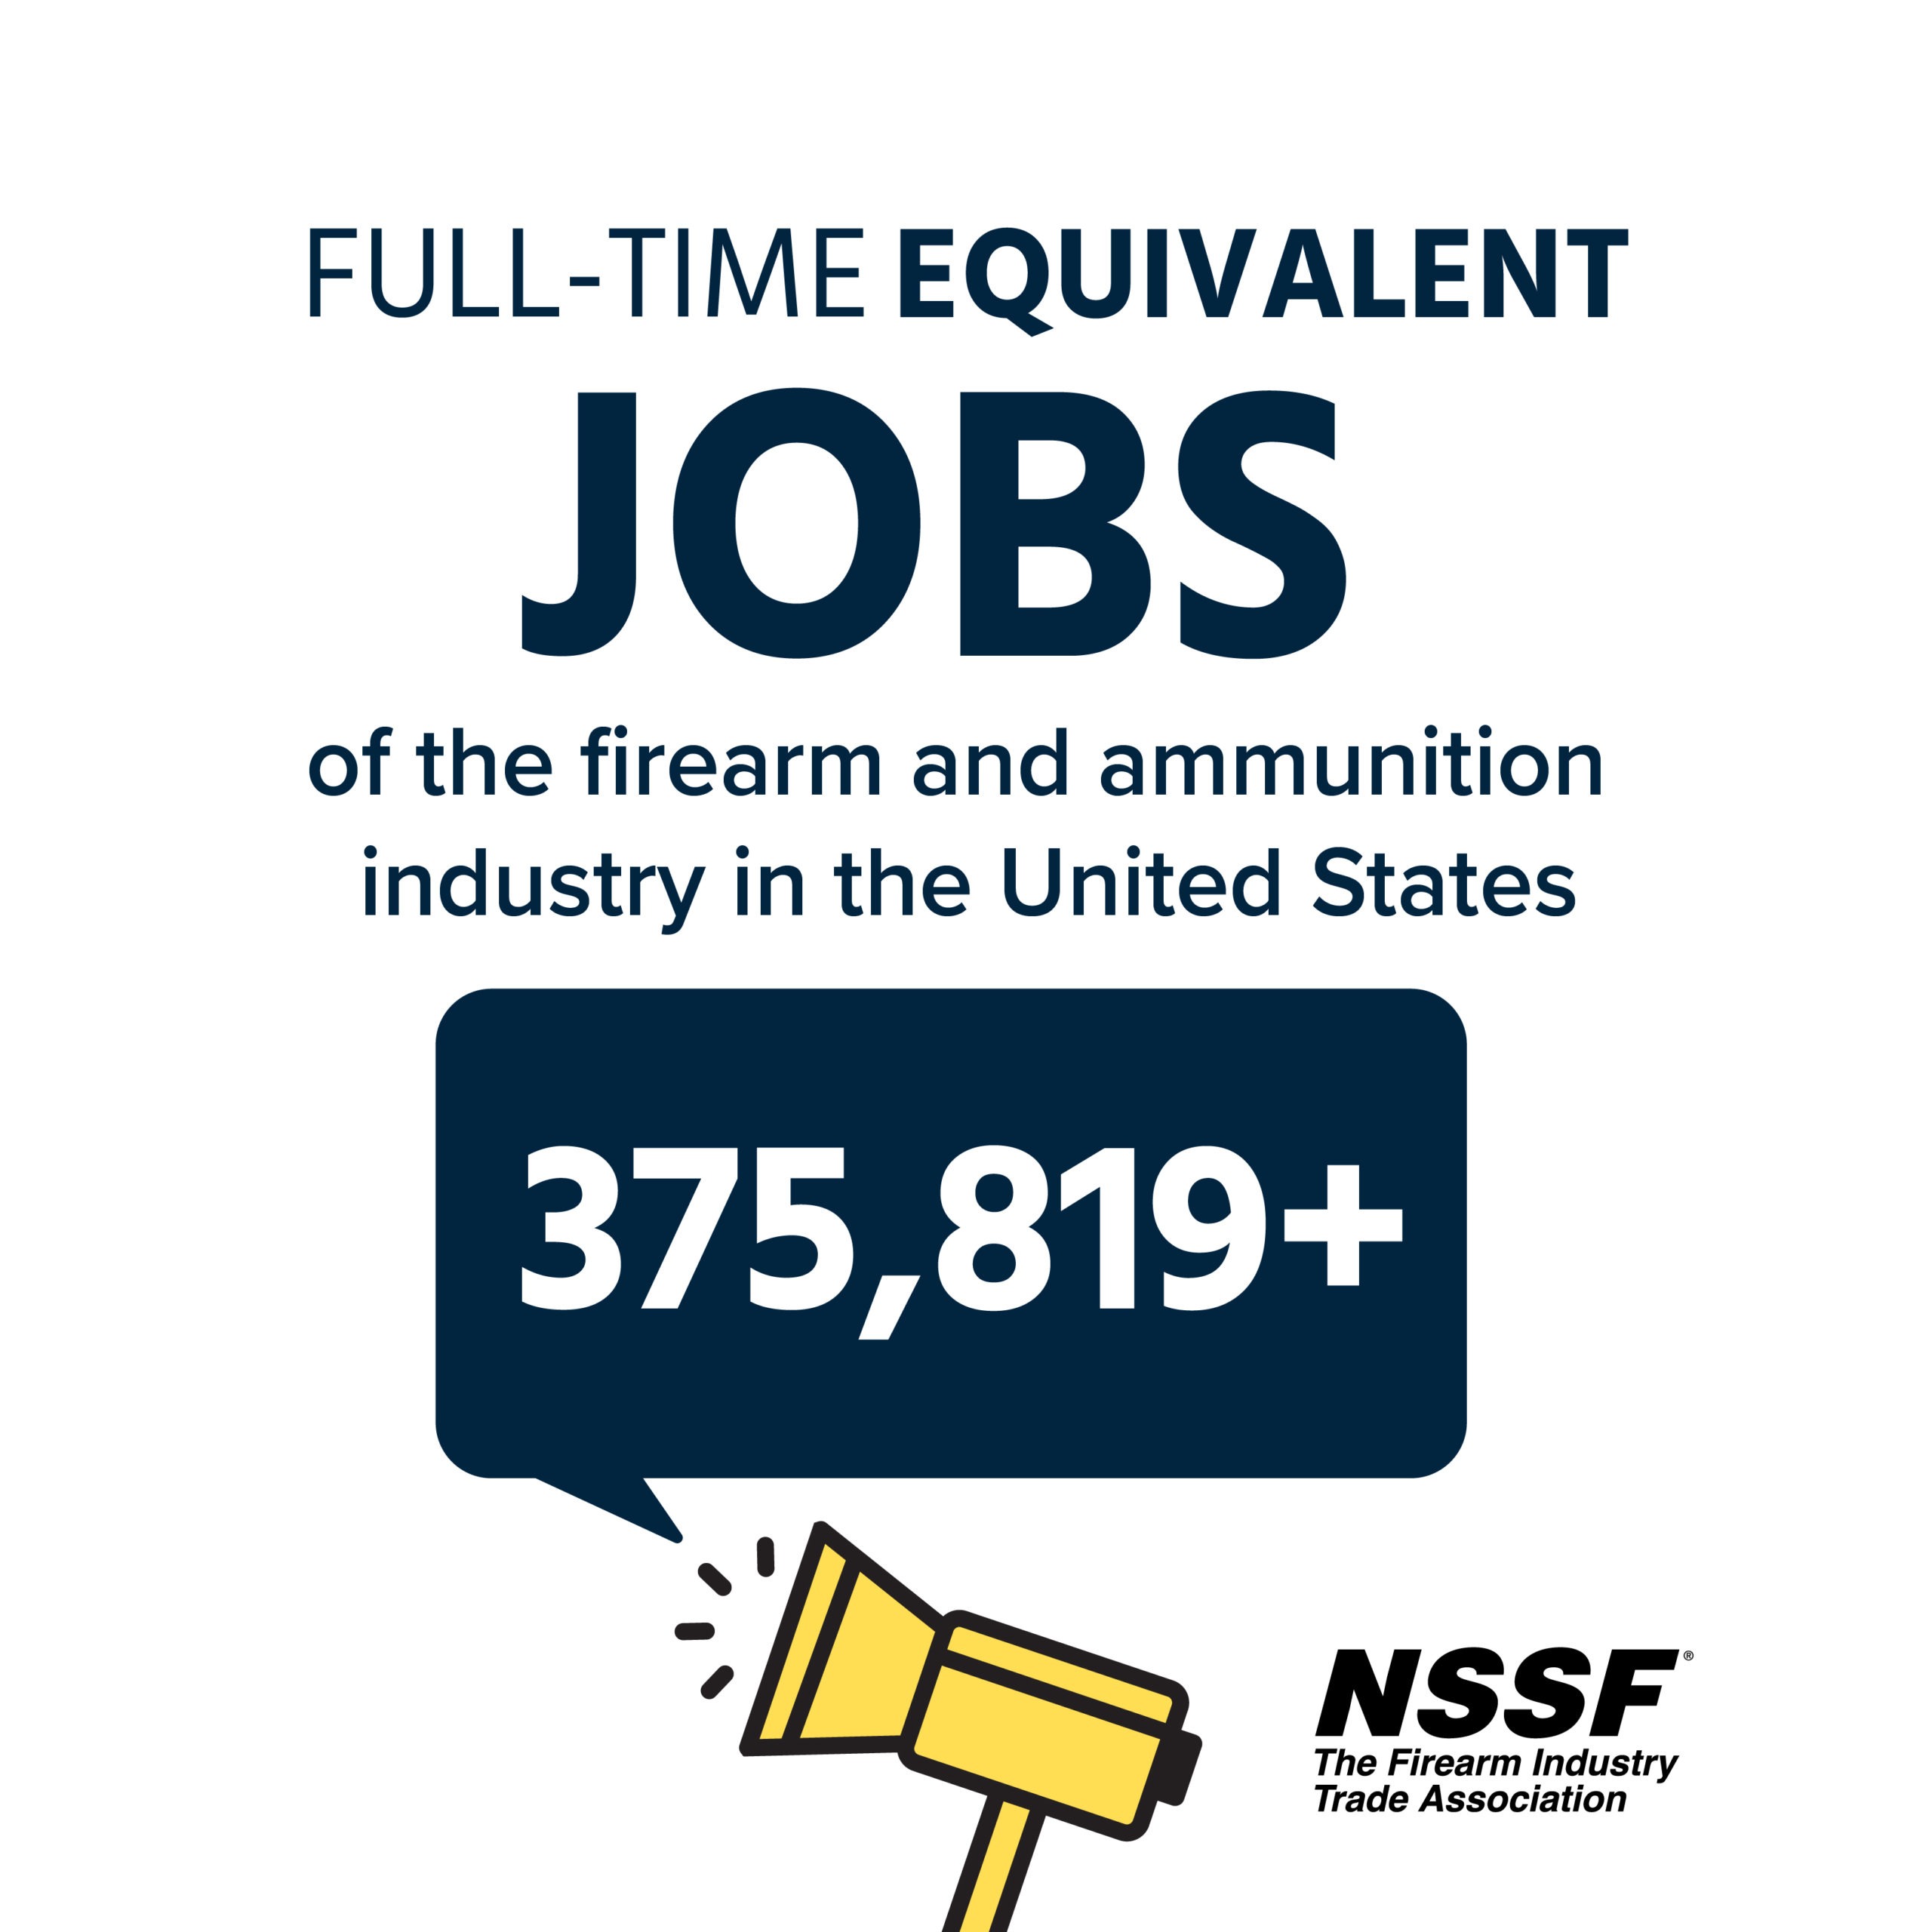 The+number+of+firearm+industry+full-time+jobs+in+the+U.S.+rose+from+approximately+166,000+in+2008+to+over+375,819+in+2021.